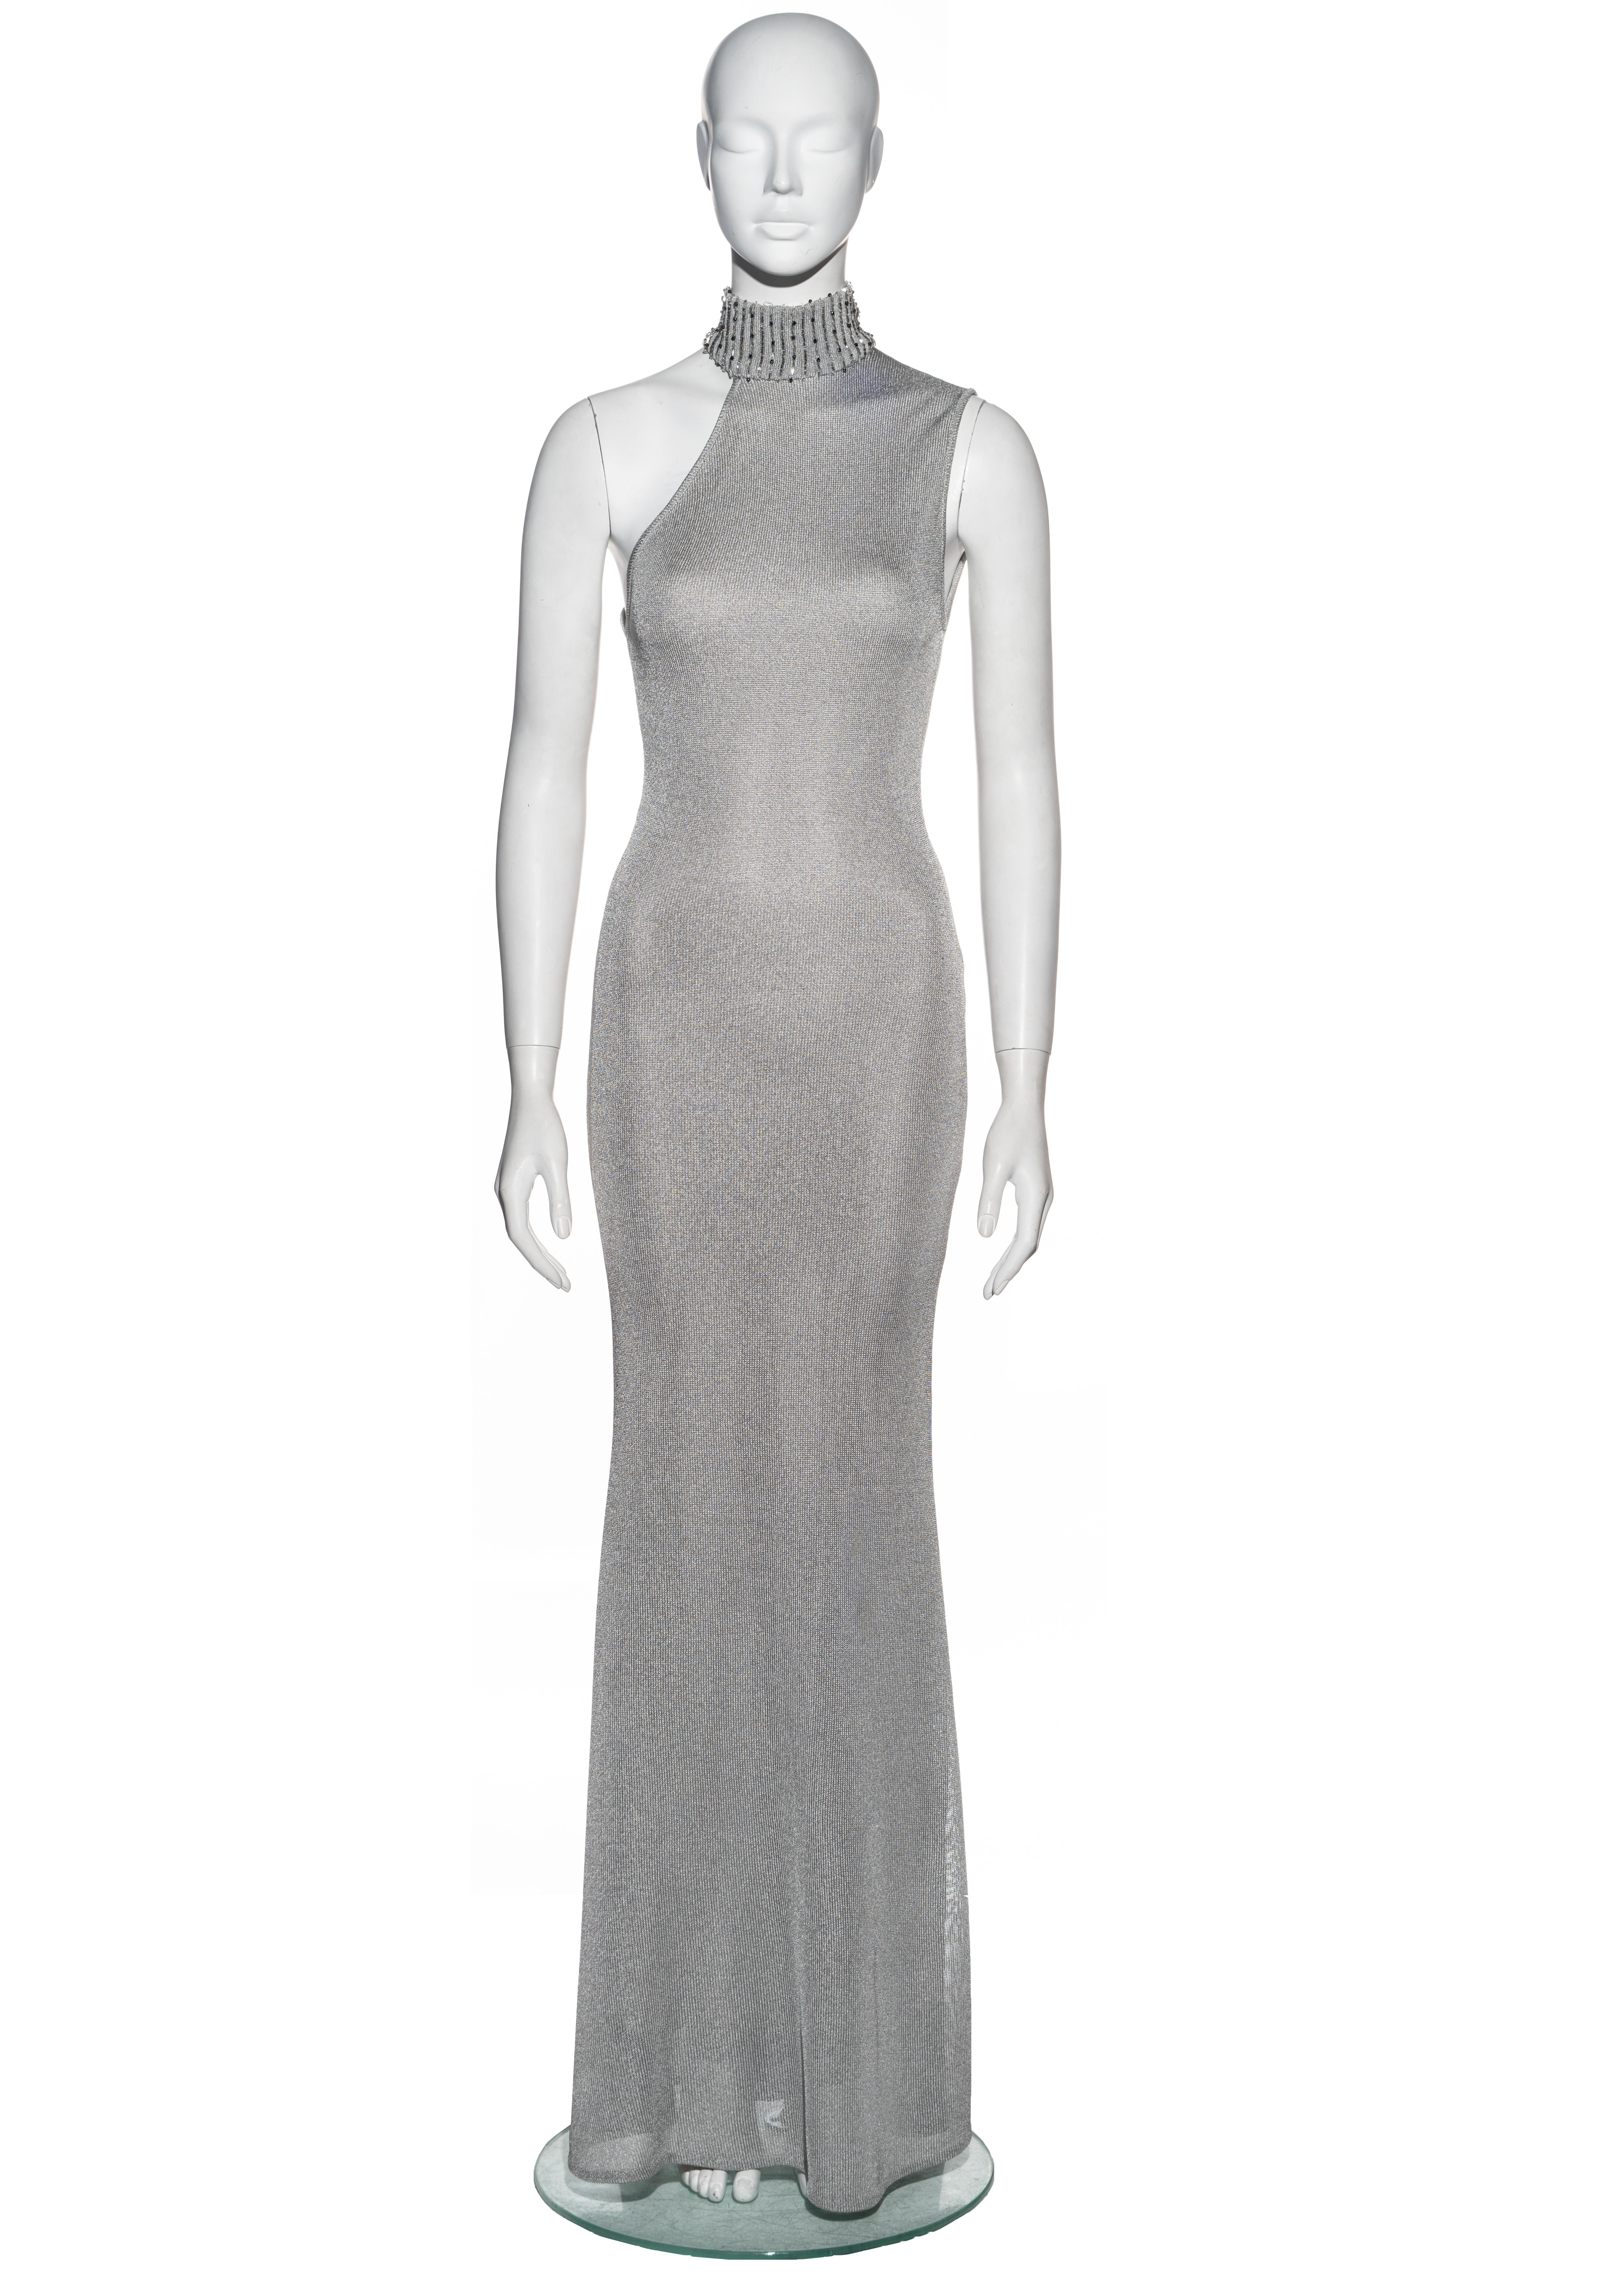 ▪ Gianni Versace silver knitted rayon evening dress
▪ Fall-Winter 1996
▪ Ribbed turtleneck with beaded vertical striped design
▪ Asymmetric neckline
▪ Floor-length skirt 
▪ Fully lined 
▪ 71% Rayon, 15% Acetate, 14% Nylon
▪ IT 44 - FR 40 - UK 12 -